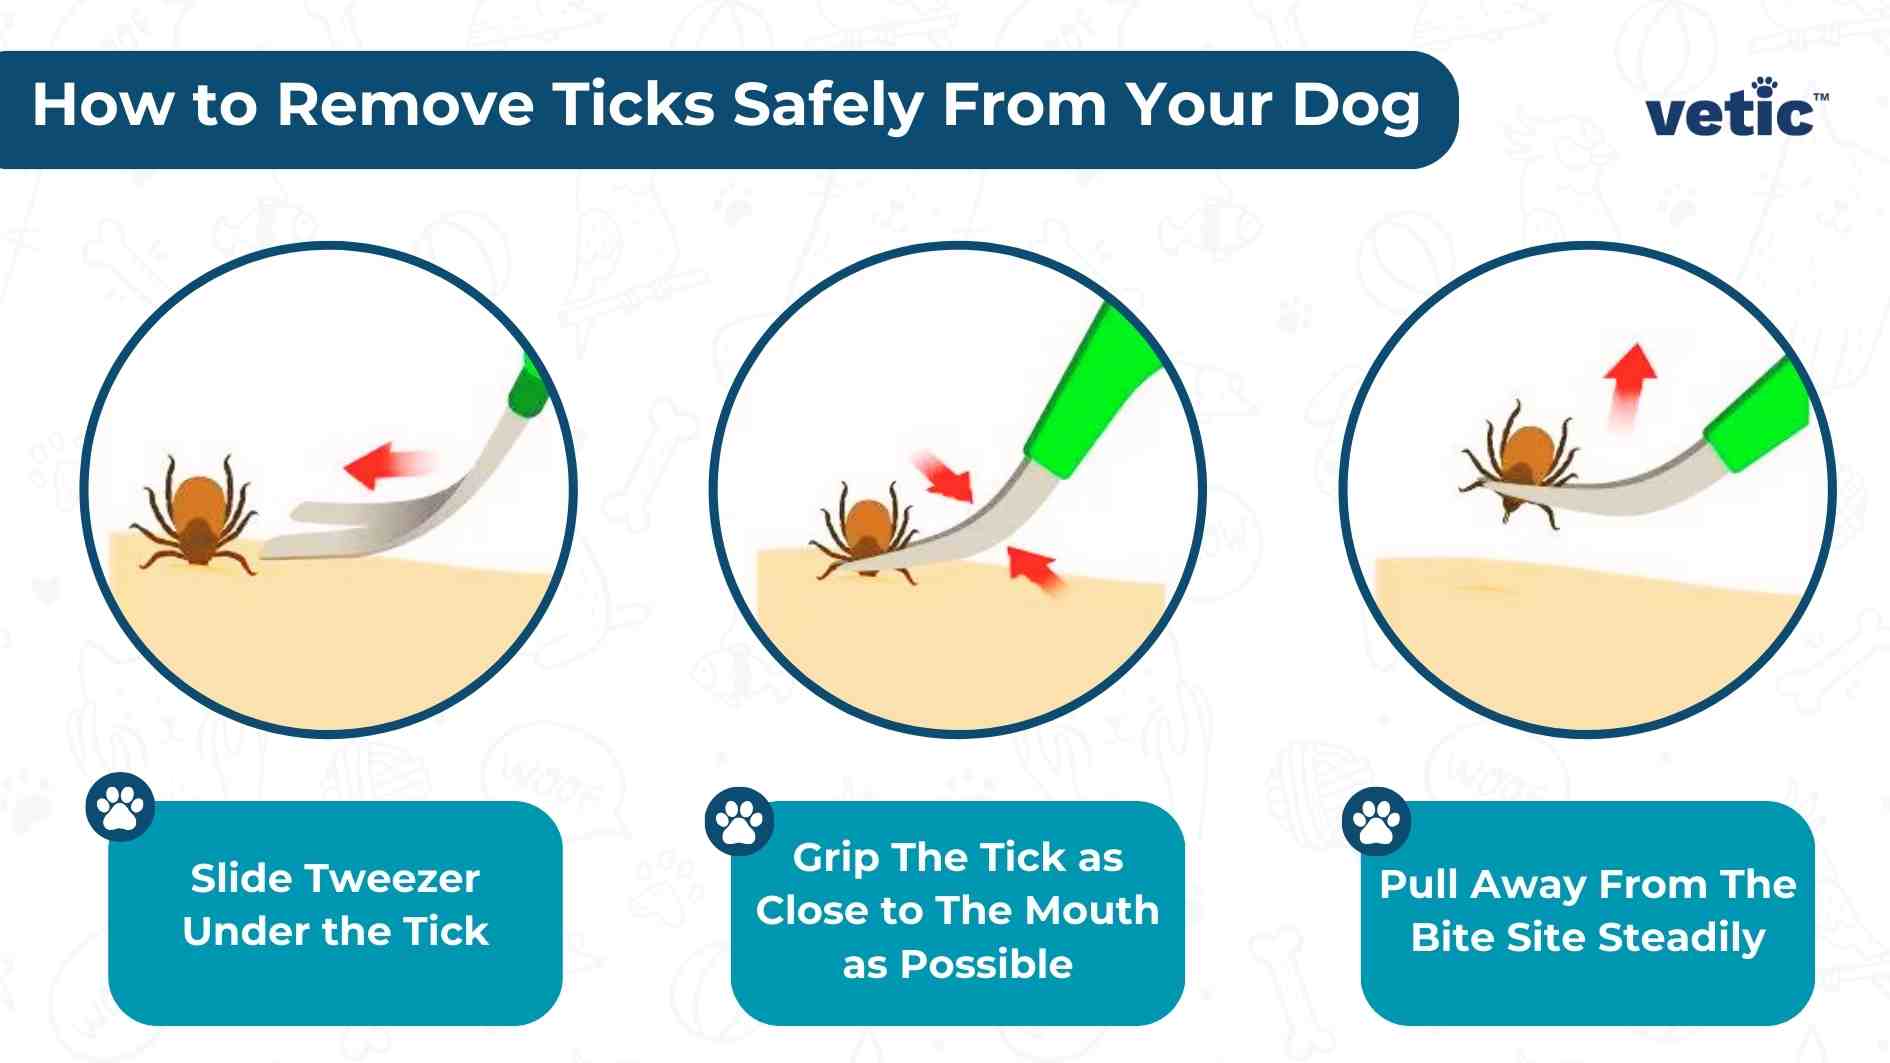 Protecting your dog from ticks also includes removing ticks safely from your dog's skin. this is an infographic by Vetic that illustrates the 3 steps to remove ticks from dogs - Slide Tweezer Under the Tick Grip The Ticks as Close to The Mouth as Possible Pull Away From The Bite Site Steadily